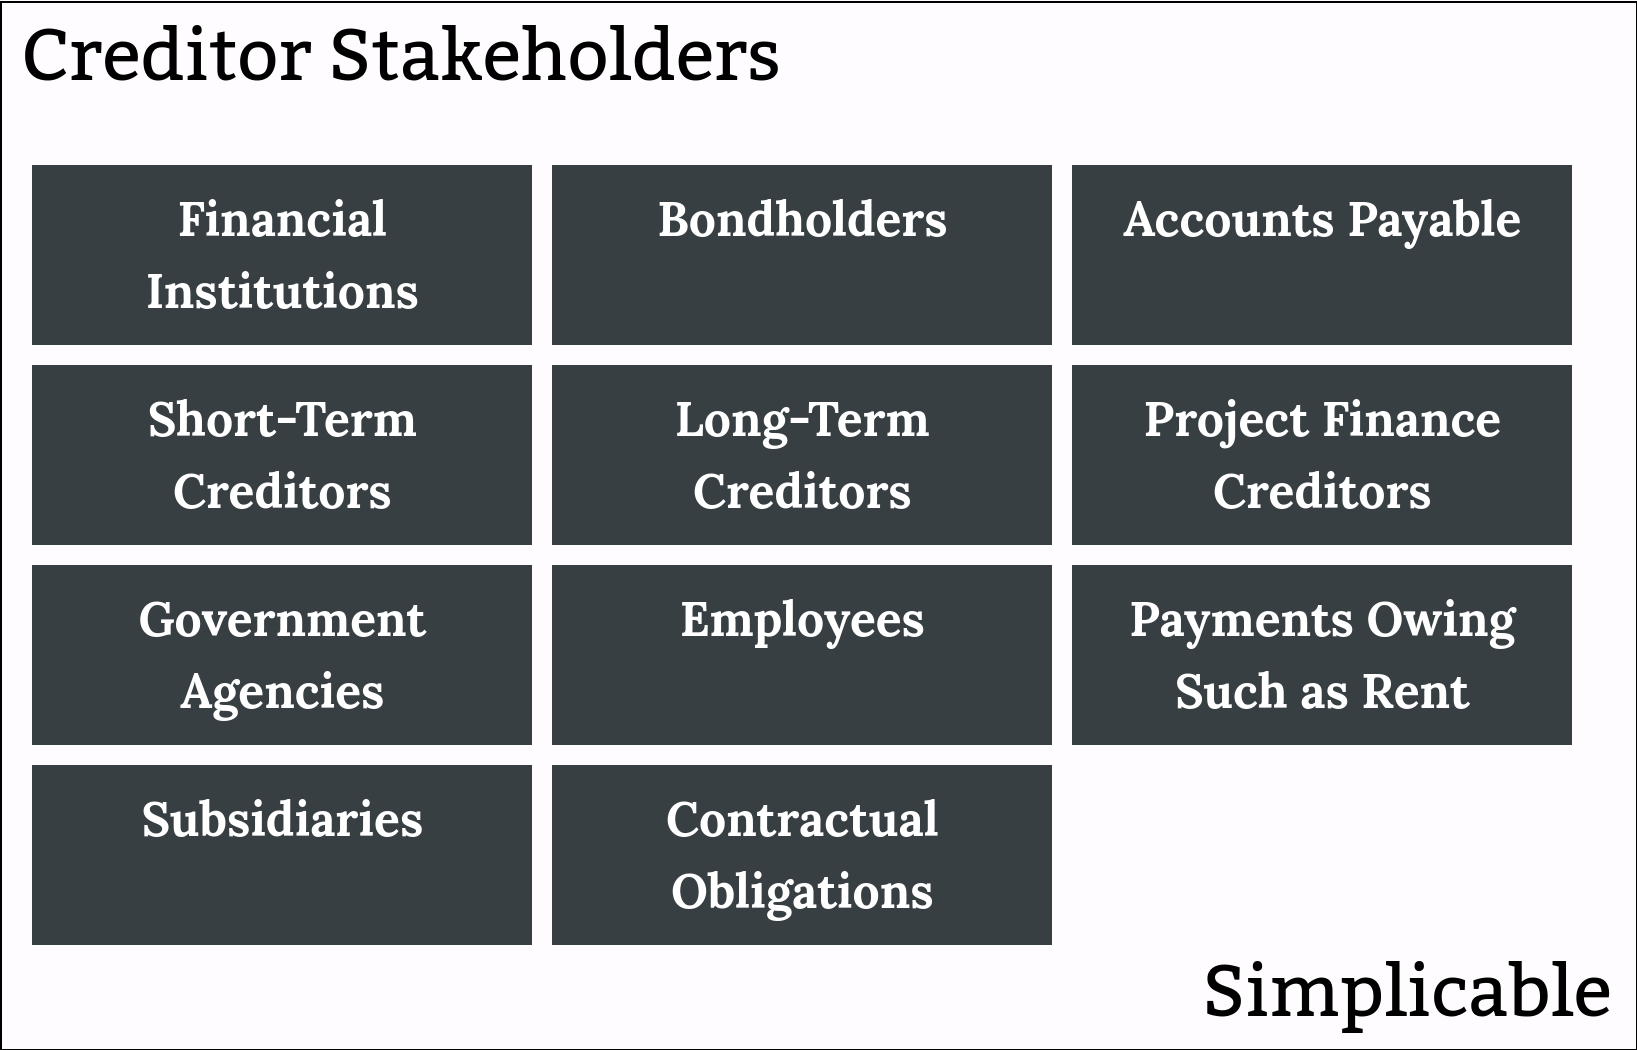 creditor stakeholders simplicable